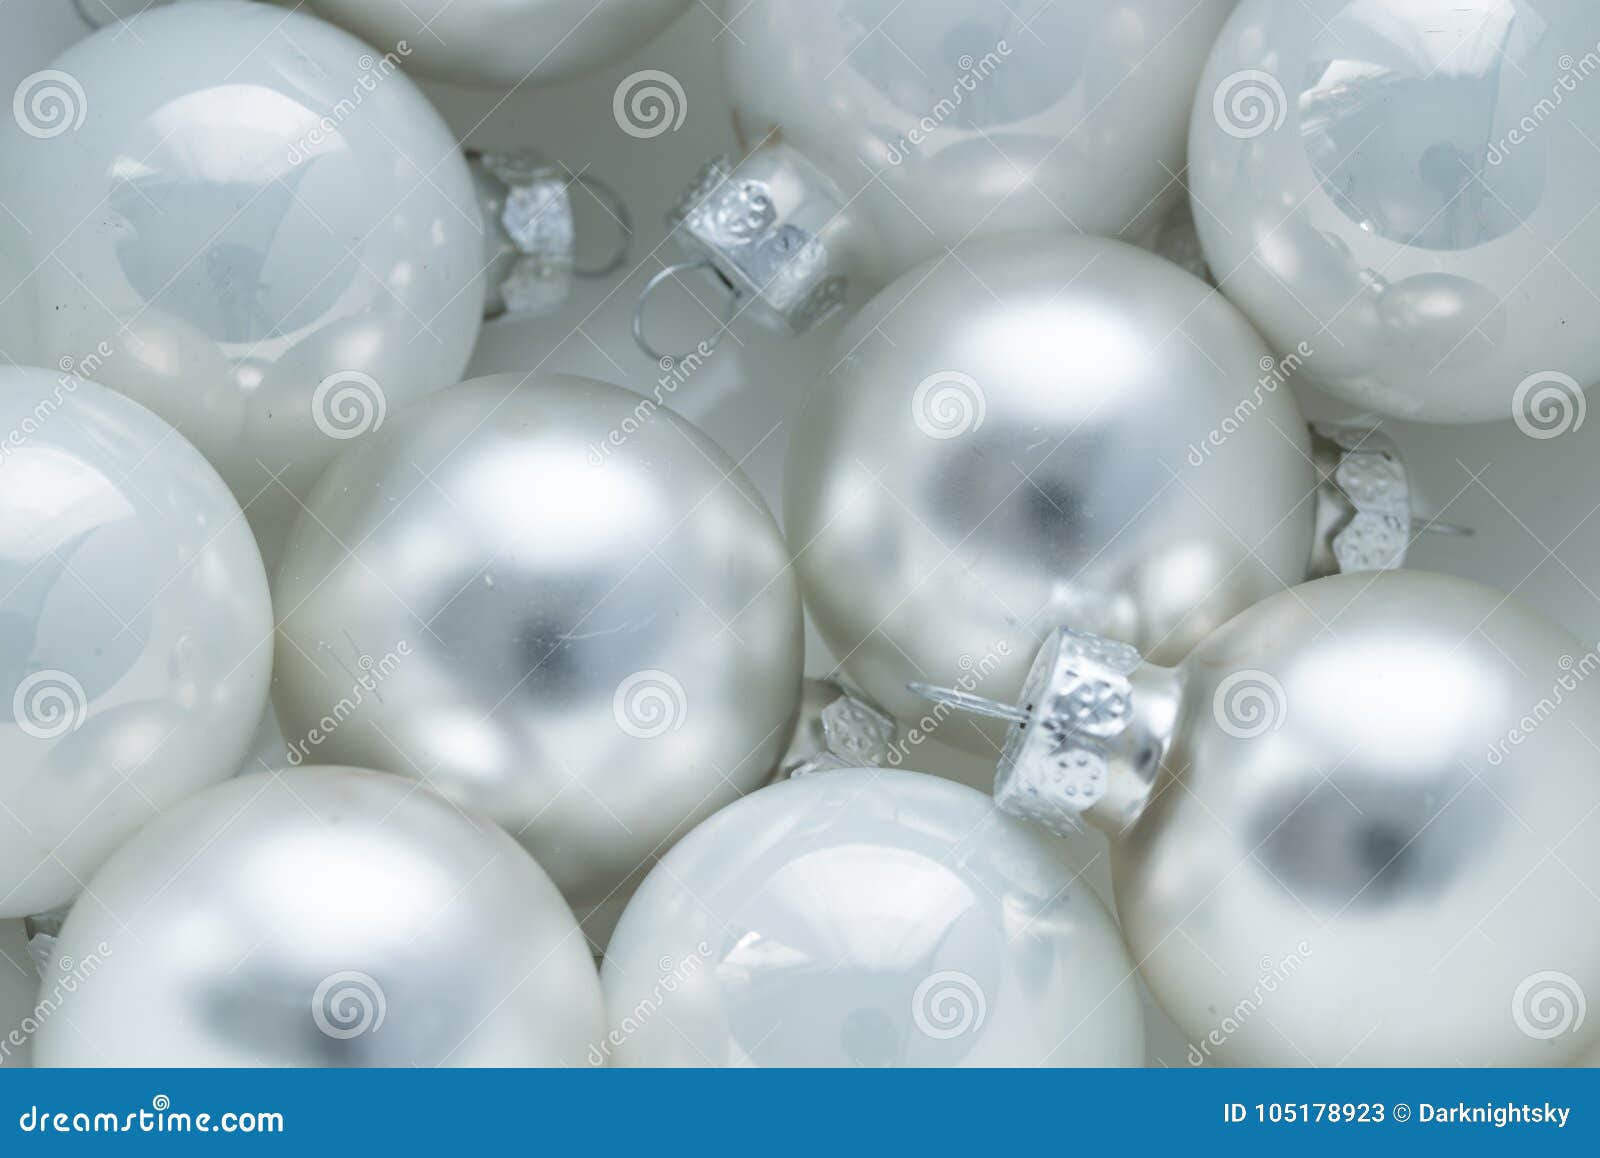 Download White Silver Beautyful Christmas Ornament Baubles With White Background Stock Image Image of magenta